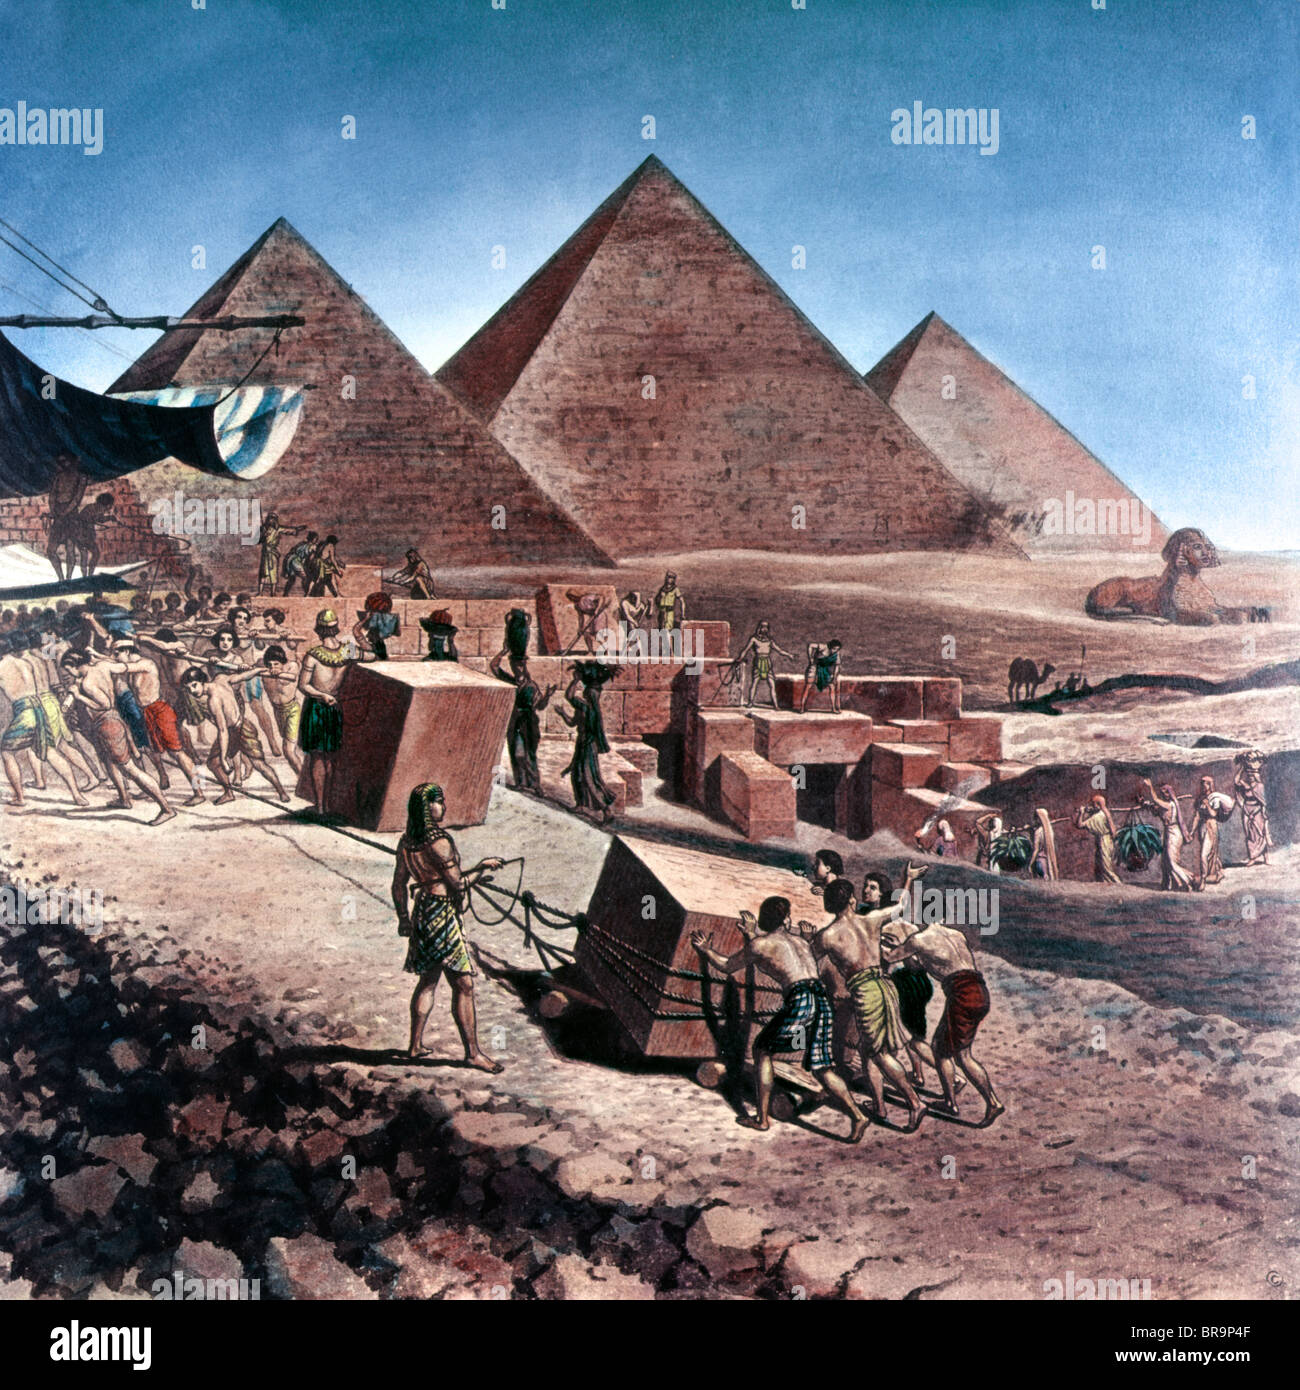 ILLUSTRATION SEVEN WONDERS OF THE ANCIENT WORLD 2150 BC PYRAMIDS OF EGYPT SLAVES WORKERS MOVING LARGE STONES UP RAMP Stock Photo